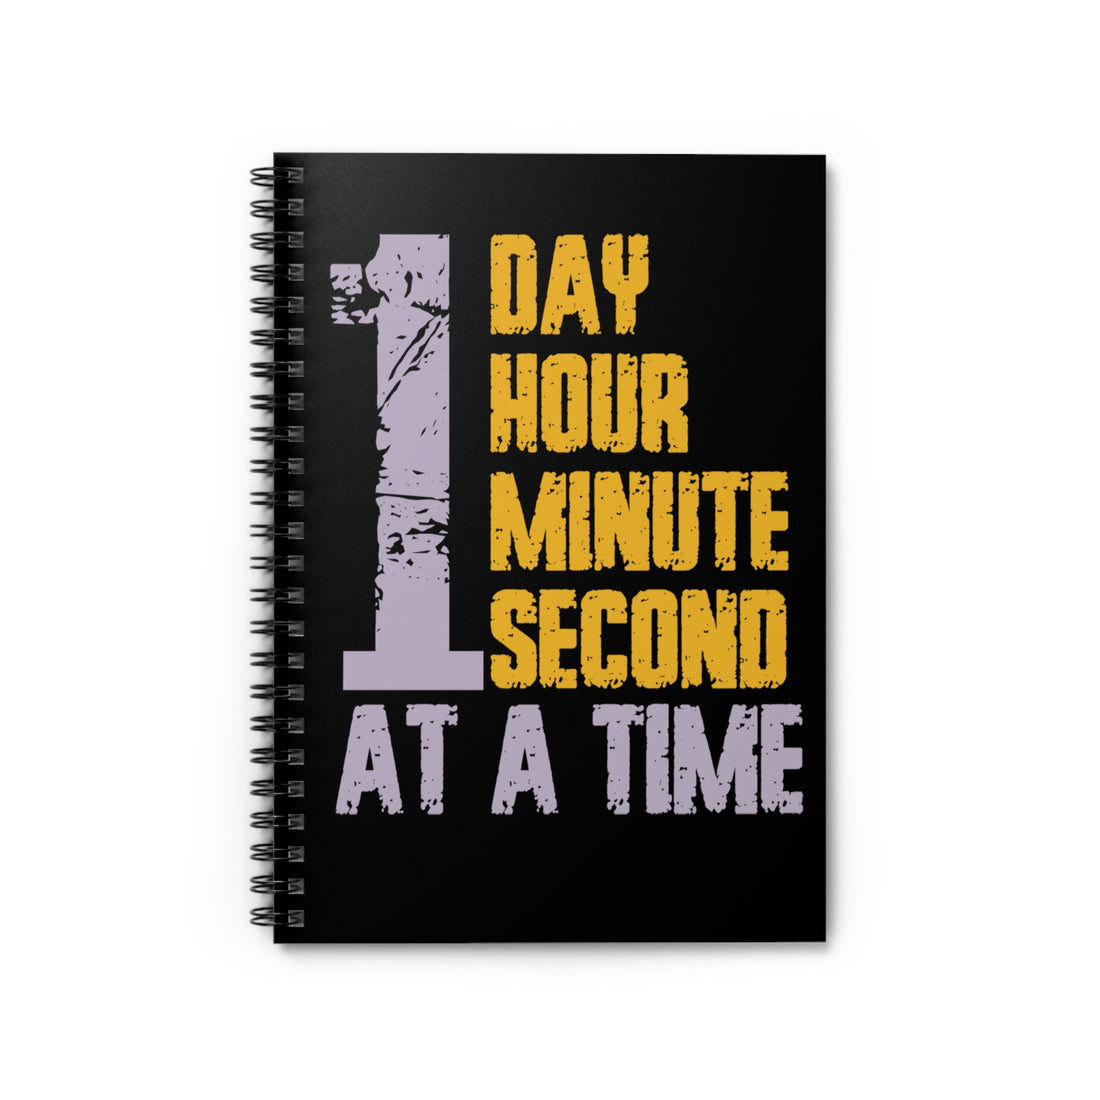 1 Day Hour Minute Second At A Time - Spiral Notebook - Ruled Line